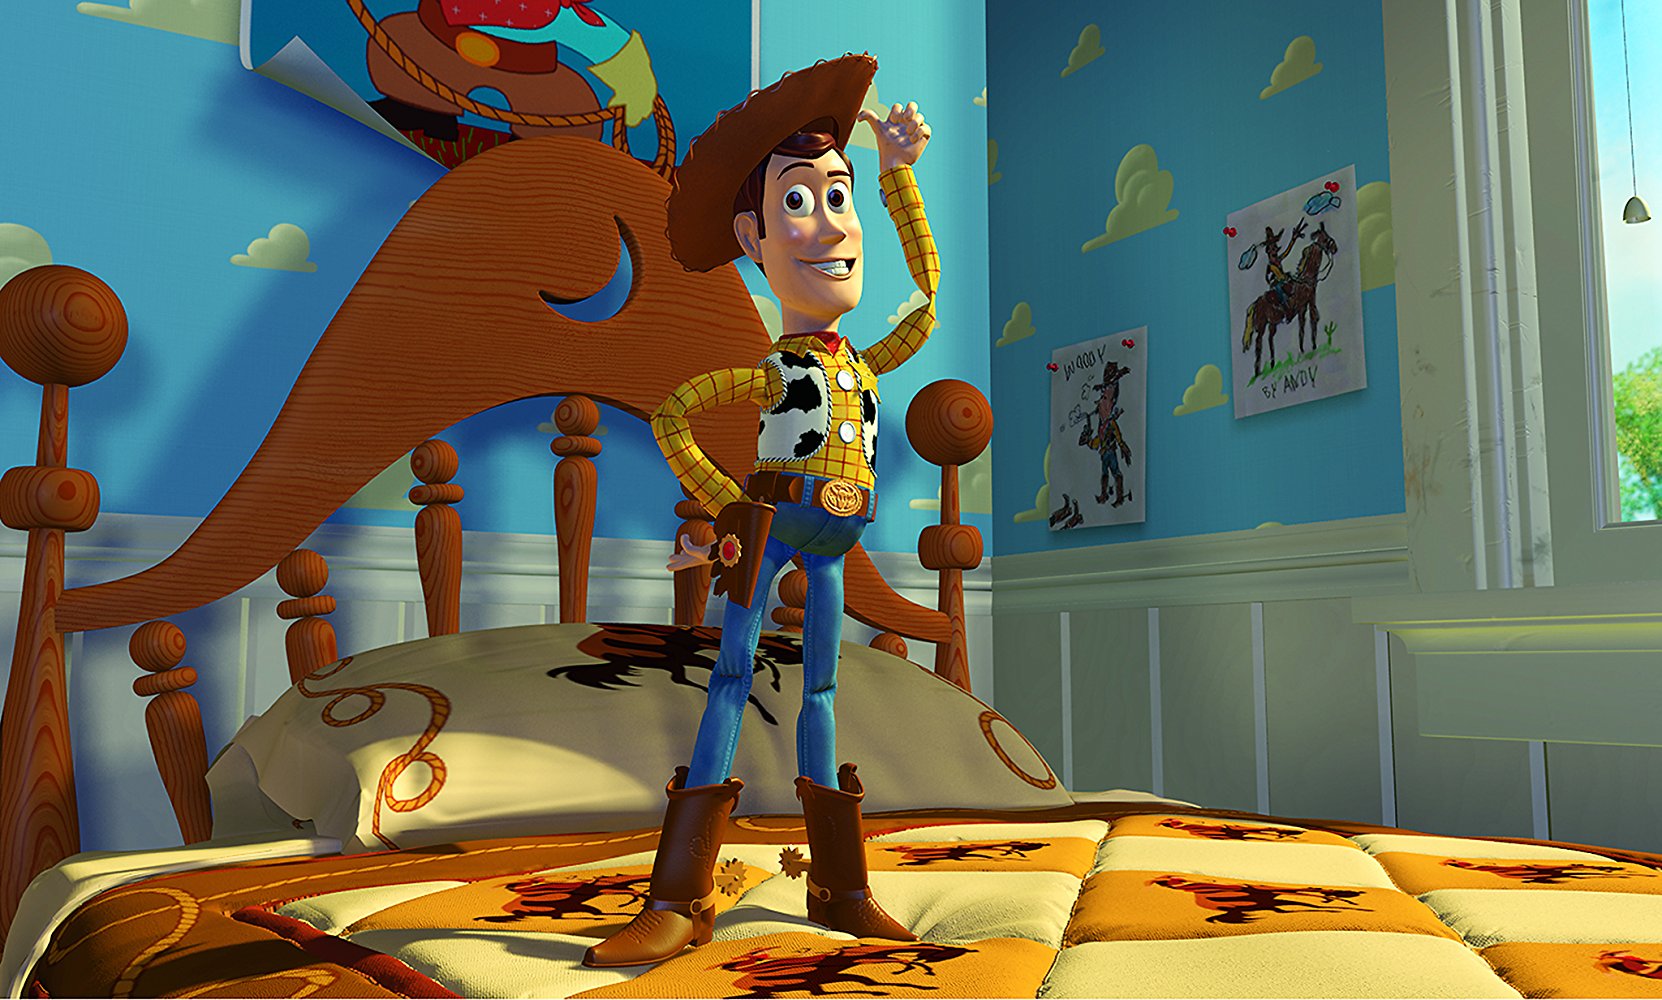 7. Toy Story, “Woody” (1995)